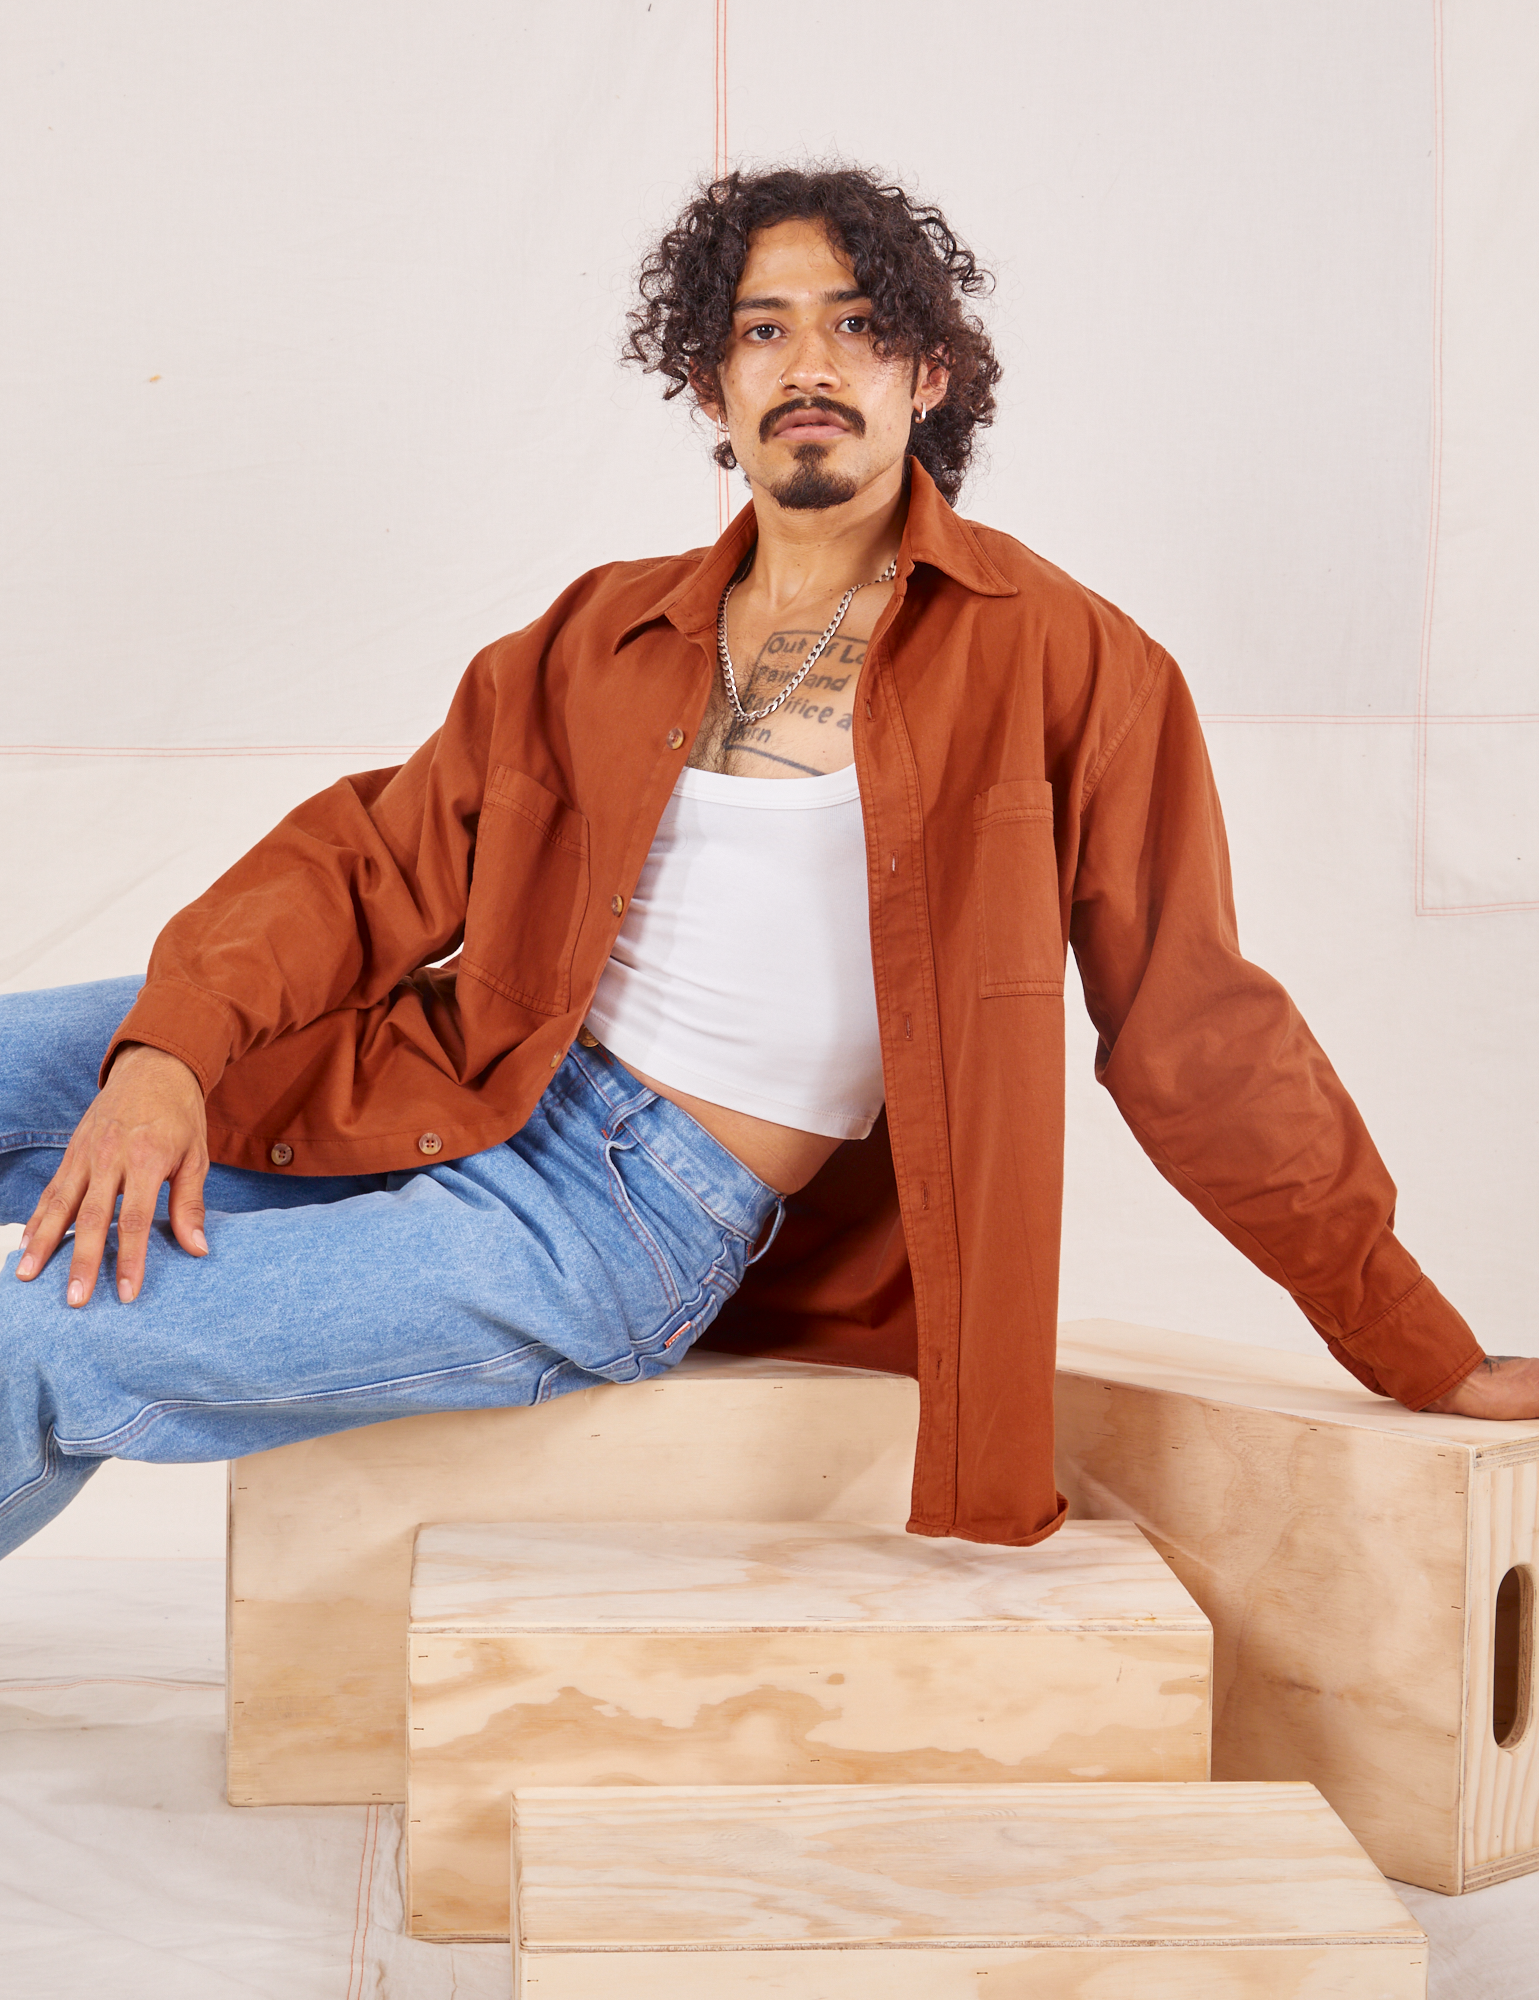 Jesse is wearing Oversize Overshirt in Burnt Terracotta paired with vintage off-white Cropped Tank Top